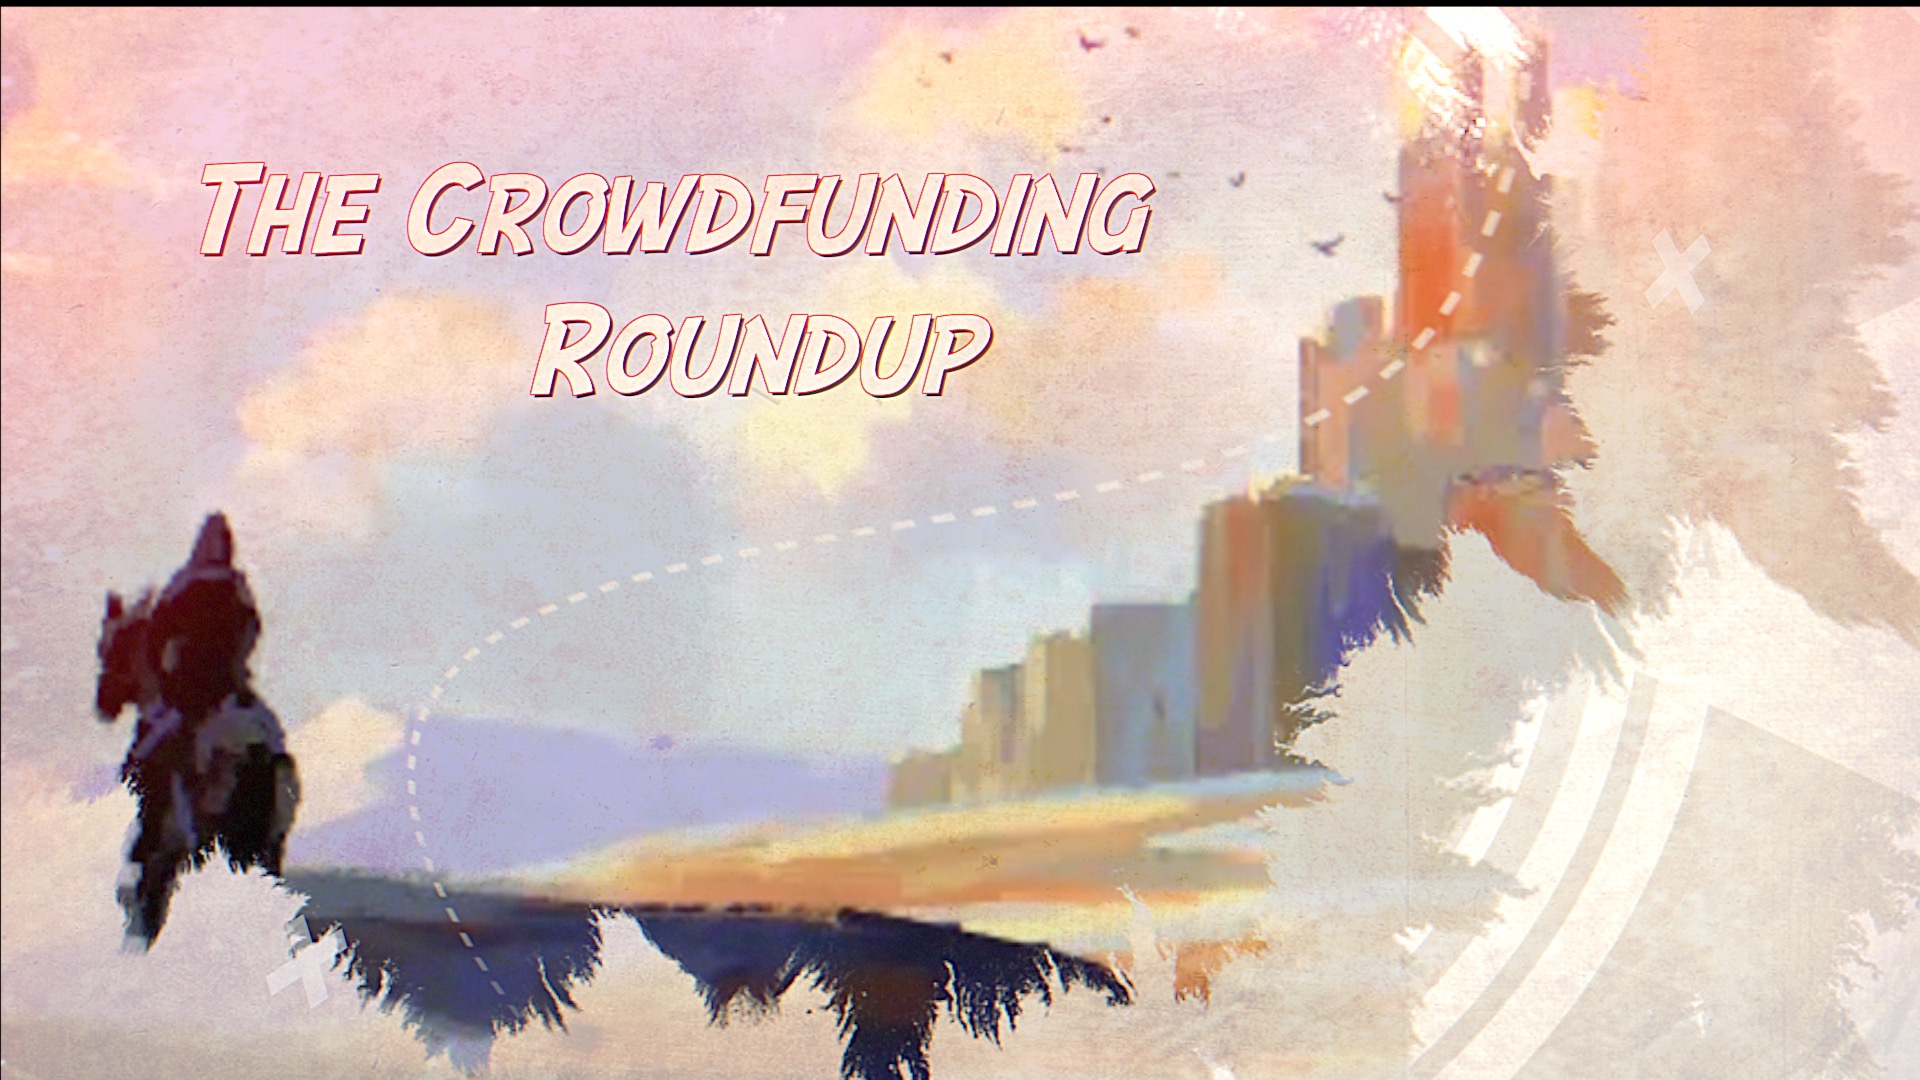 The Crowdfunding Roundup for Friday – Monday, March 31st – April 3rd